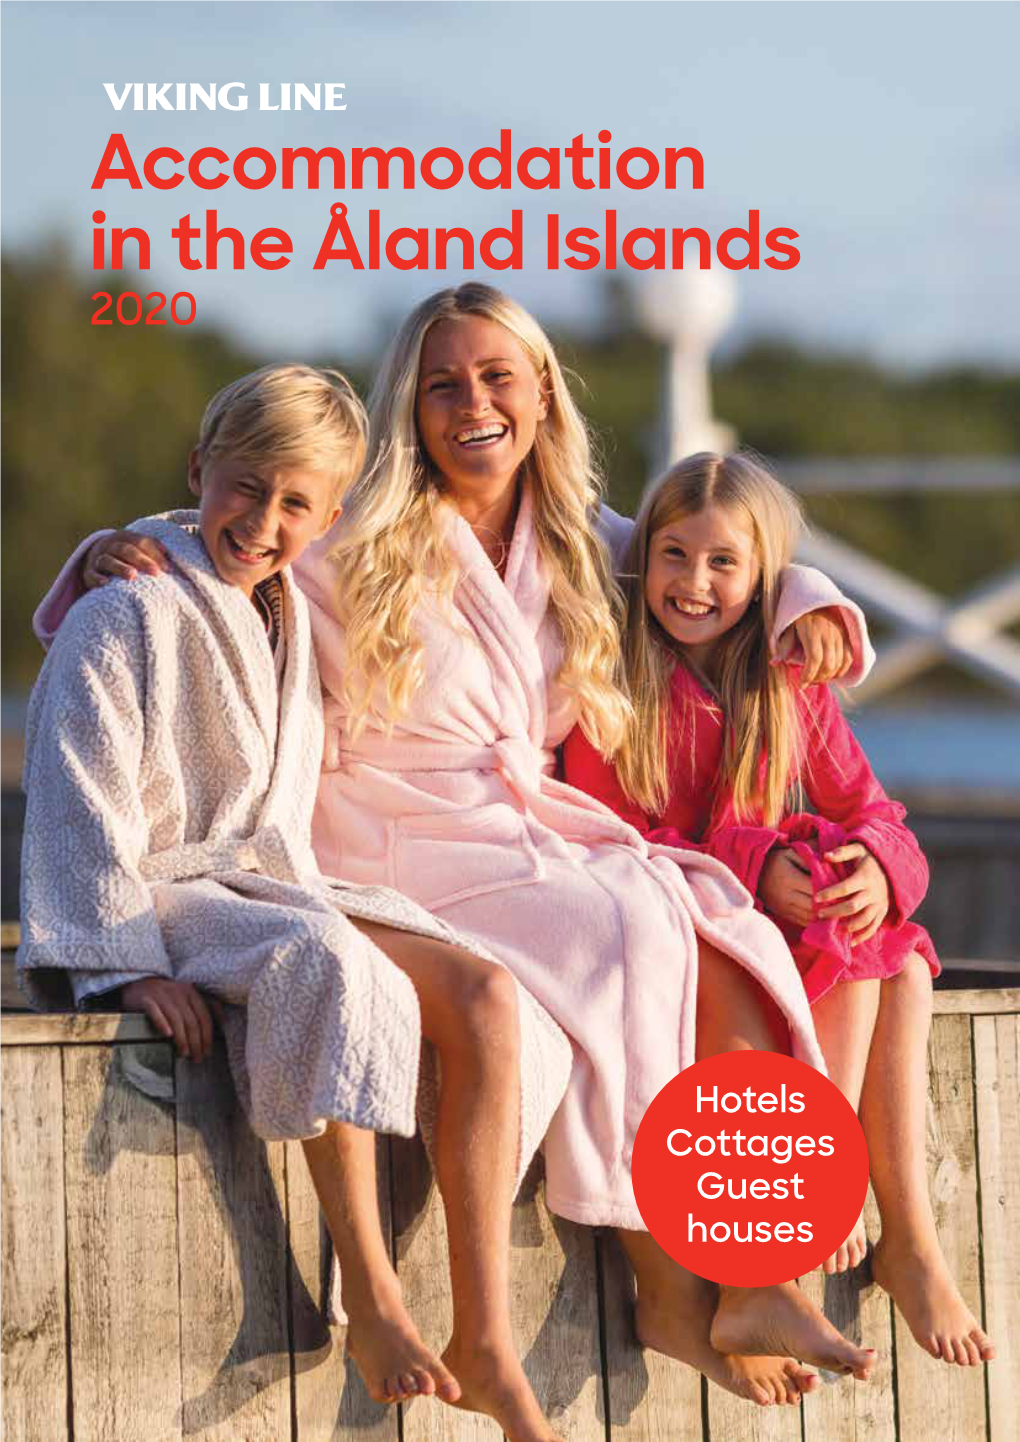 Accommodation in the Åland Islands 2020